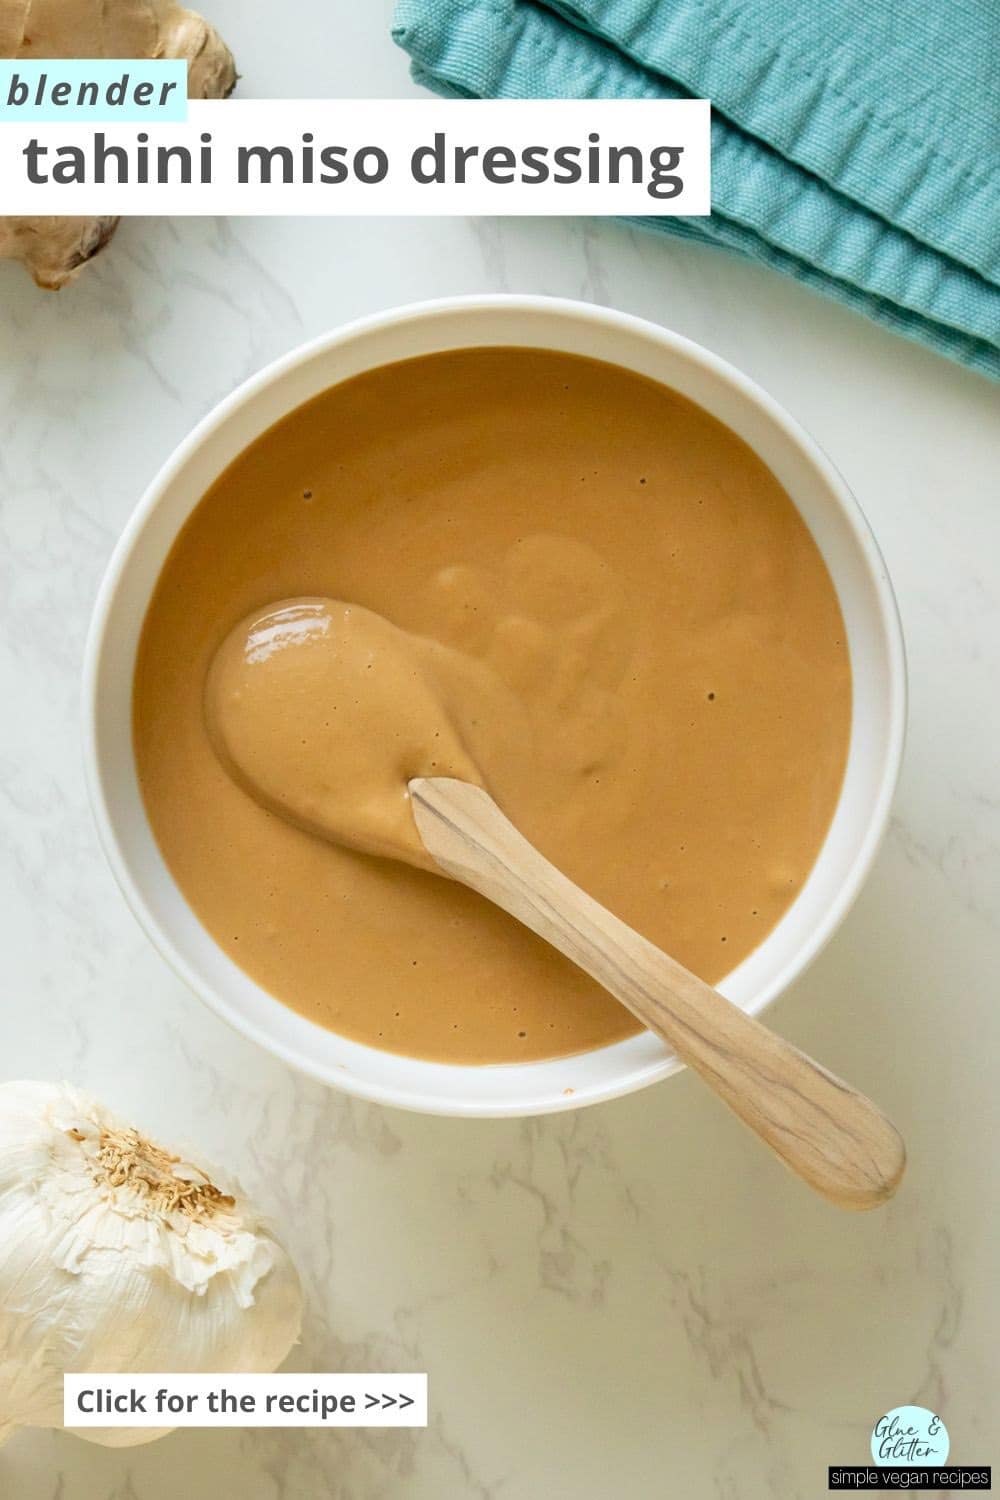 white bowl of tahini miso dressing with a spoon in it, so you can see the creamy texture. Text overlay